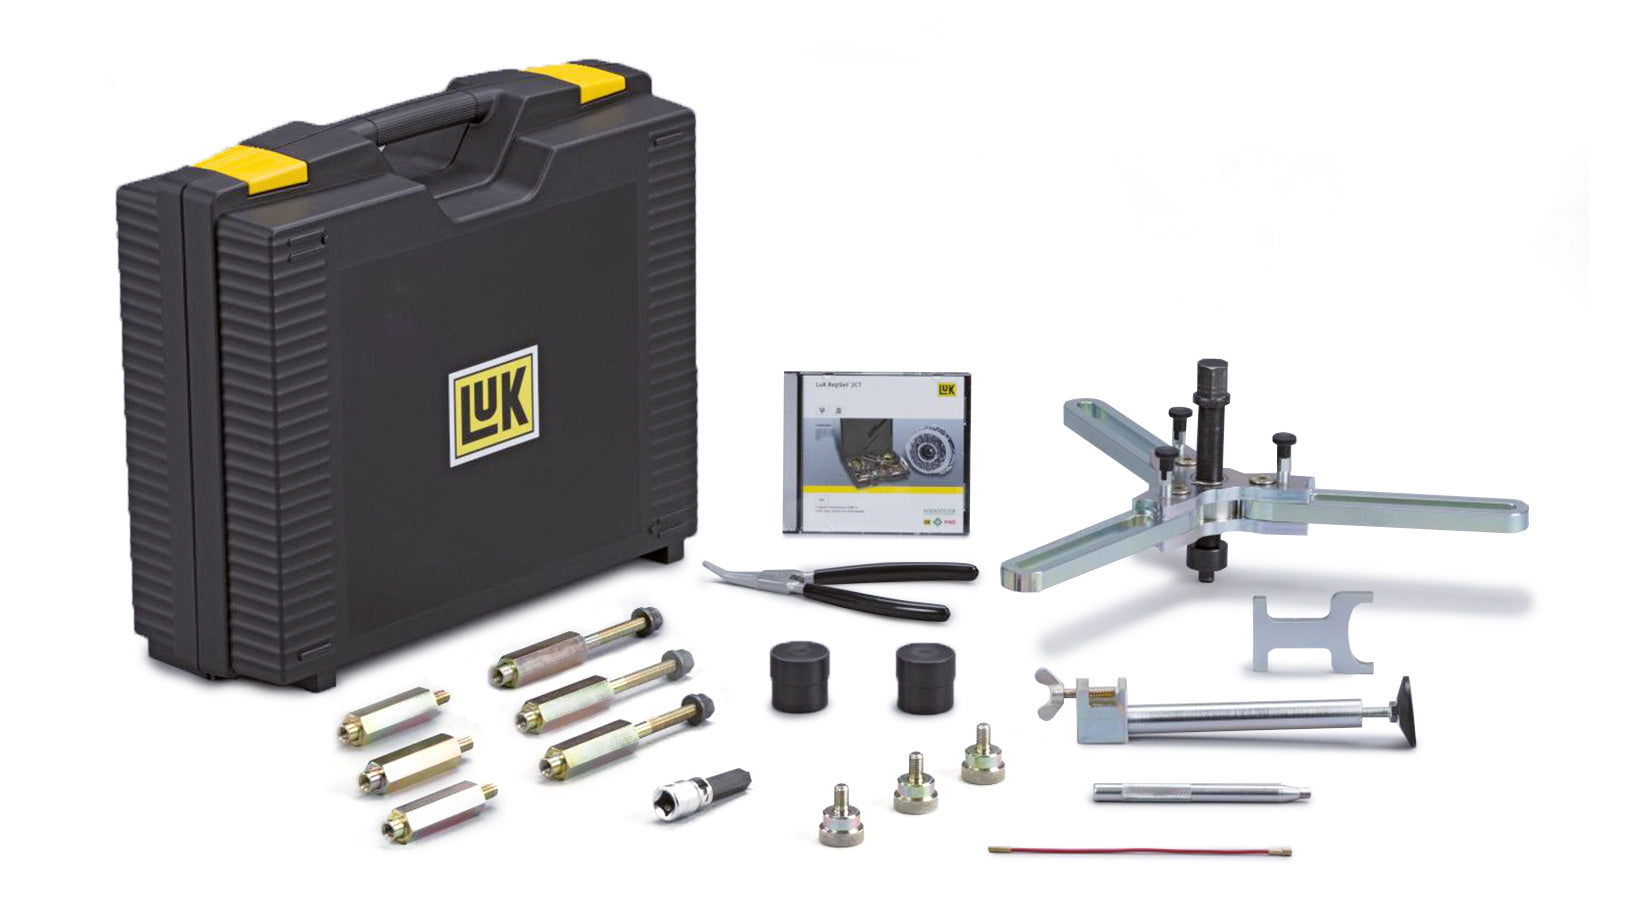 LUK 2CT Basic tool kit with case sitting beside full contents